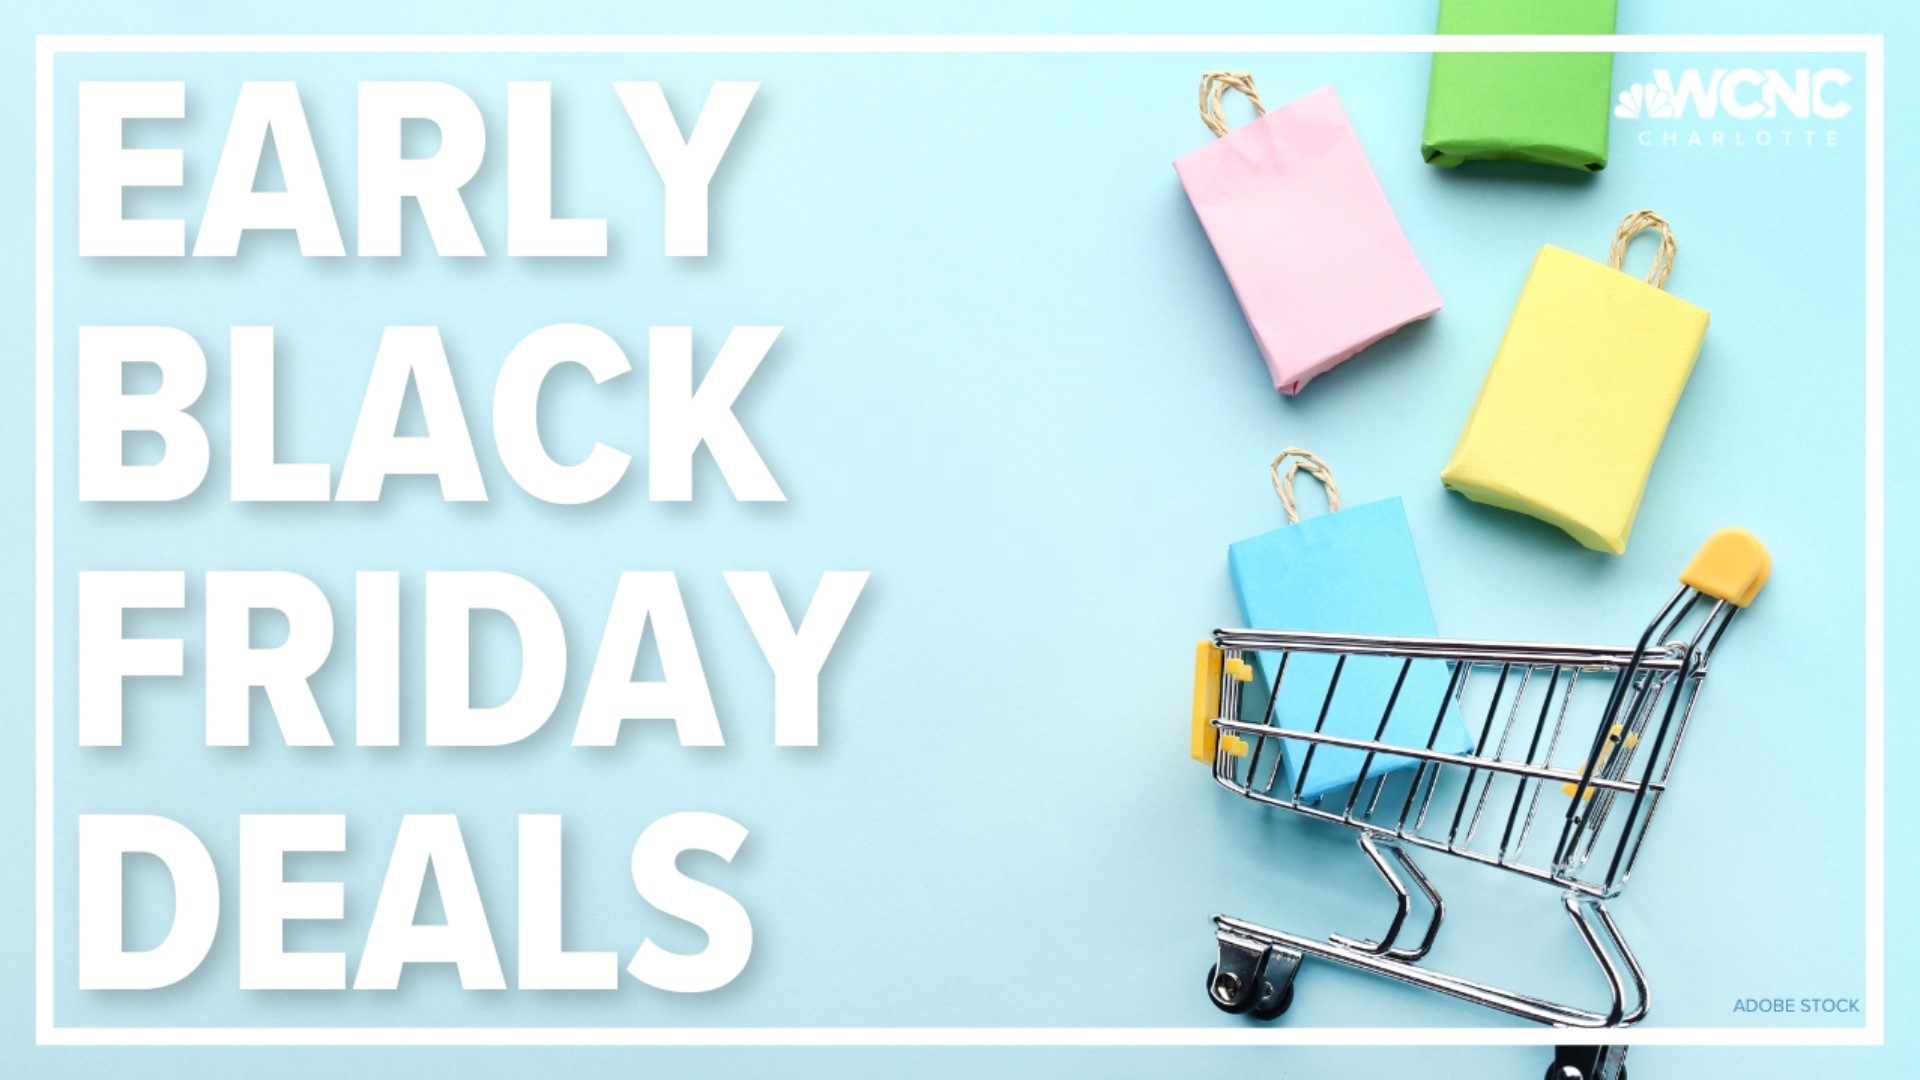 If you're looking to score great deals before Black Friday, most major retailers have rolled out their holiday shopping specials early.